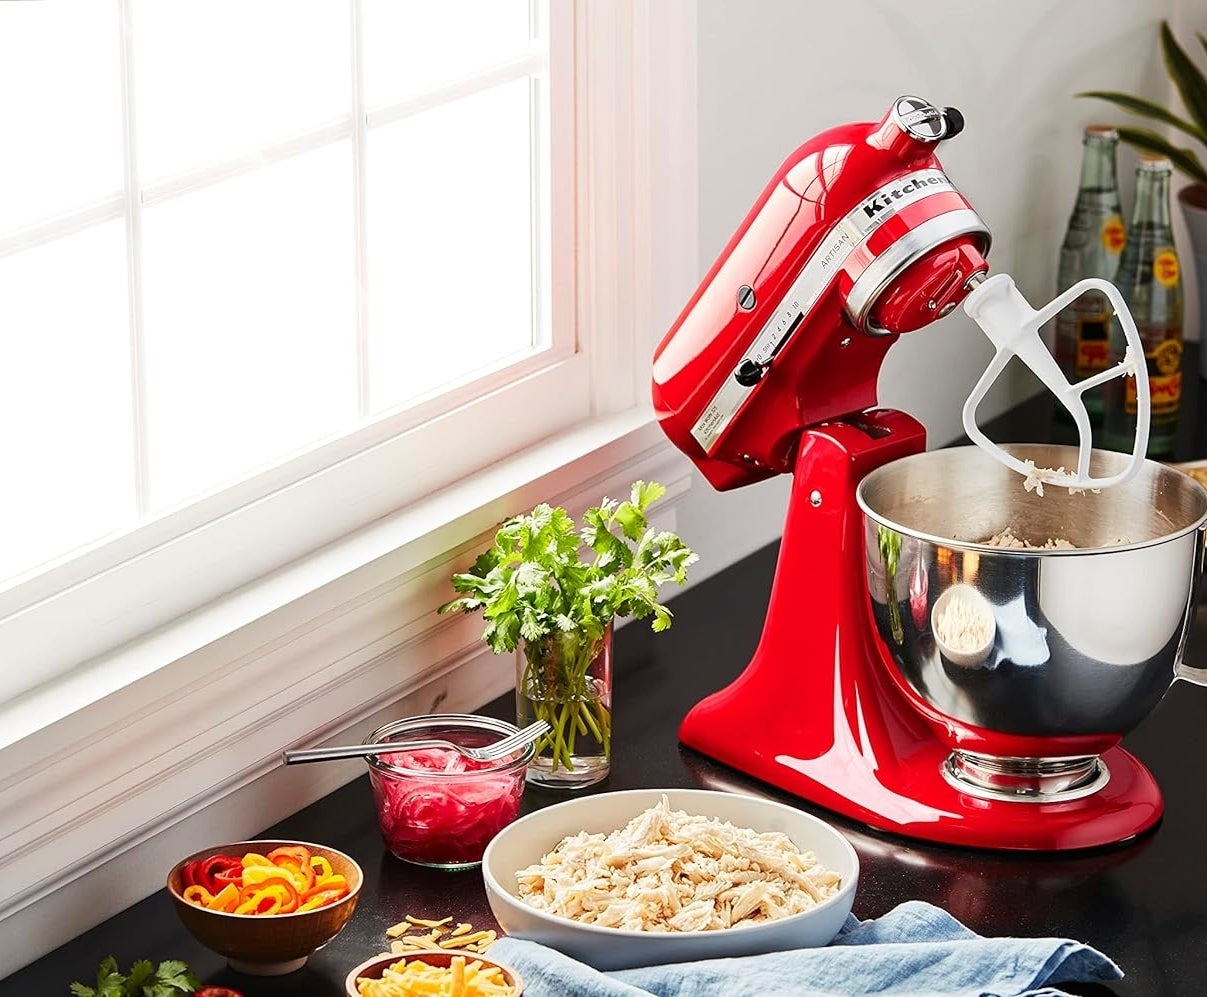 The red kitchenaid in use on a countertop